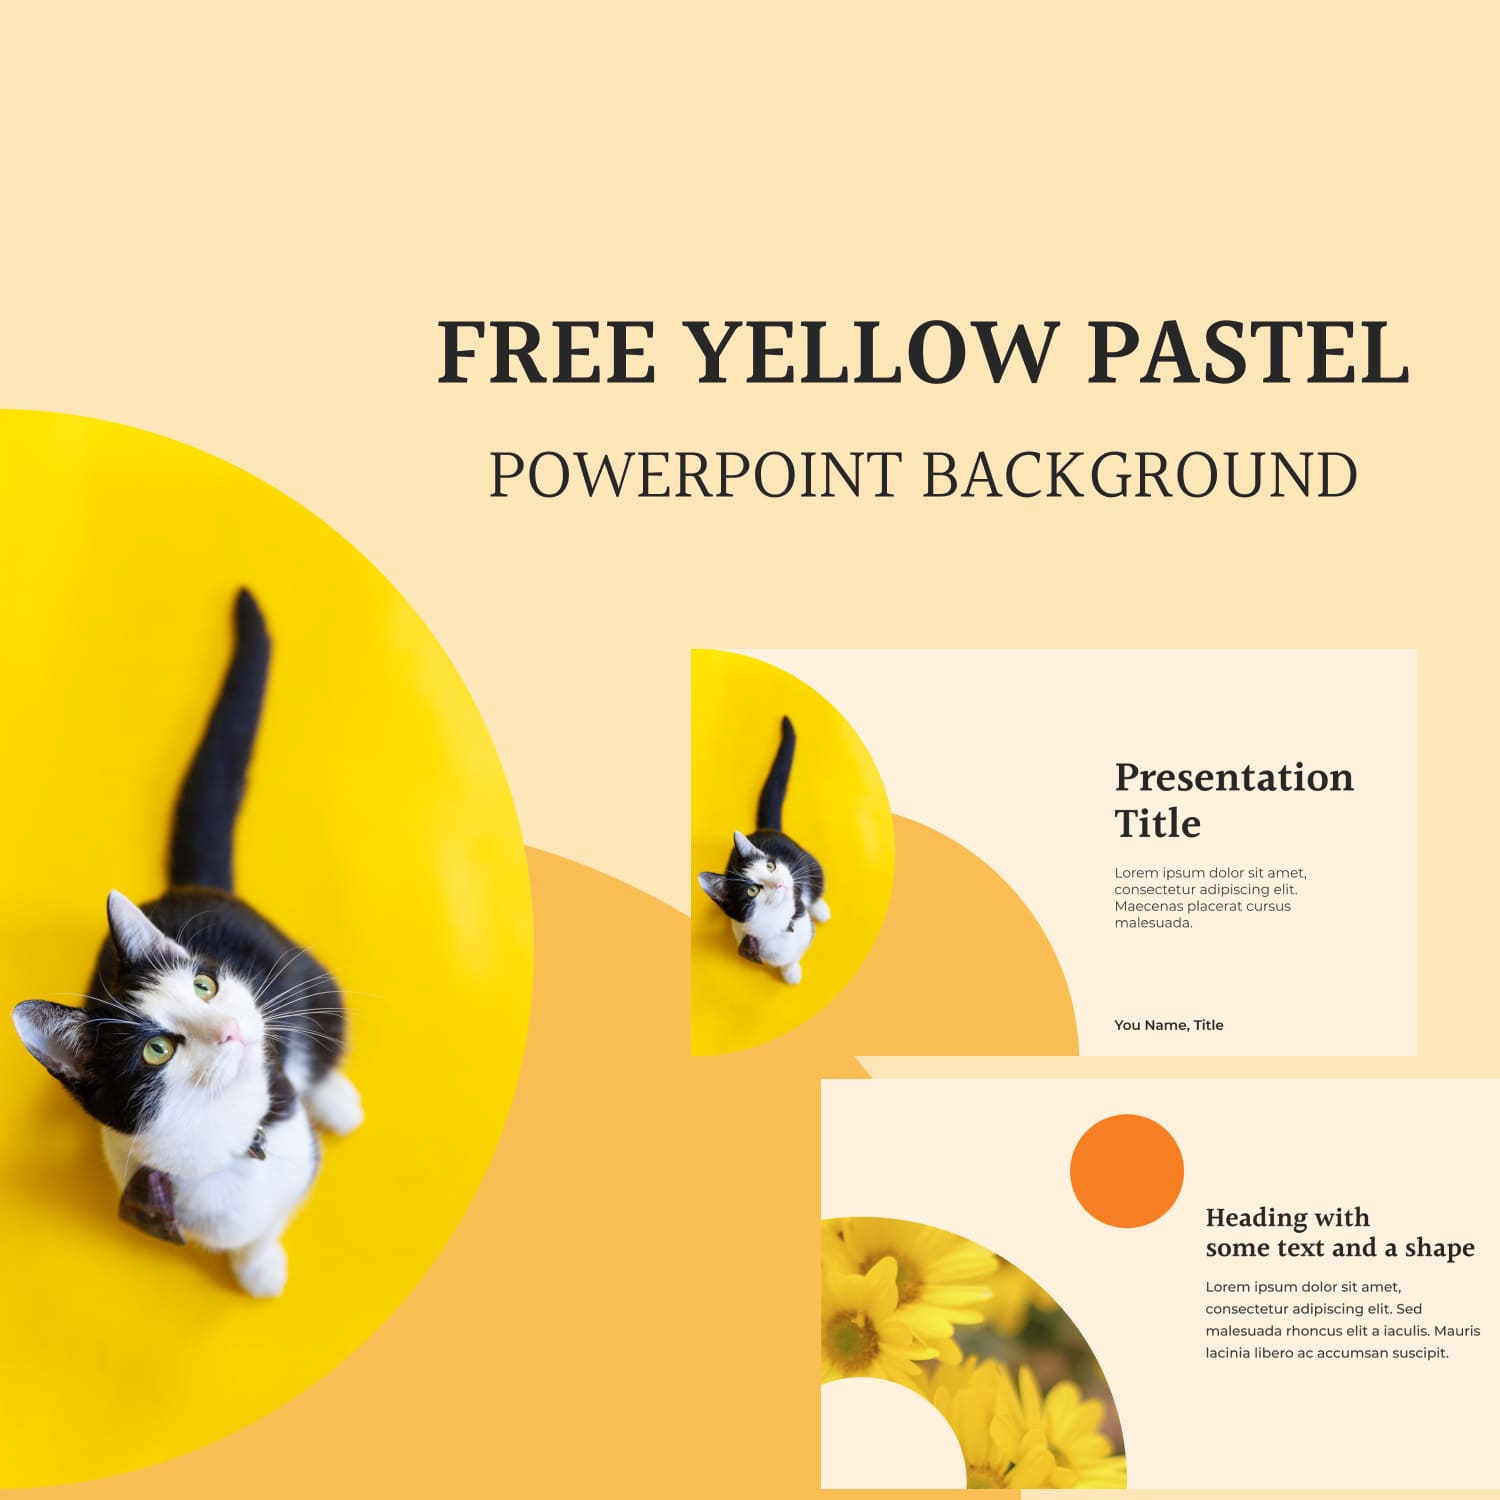 Free Yellow Pastel Powerpoint Background.